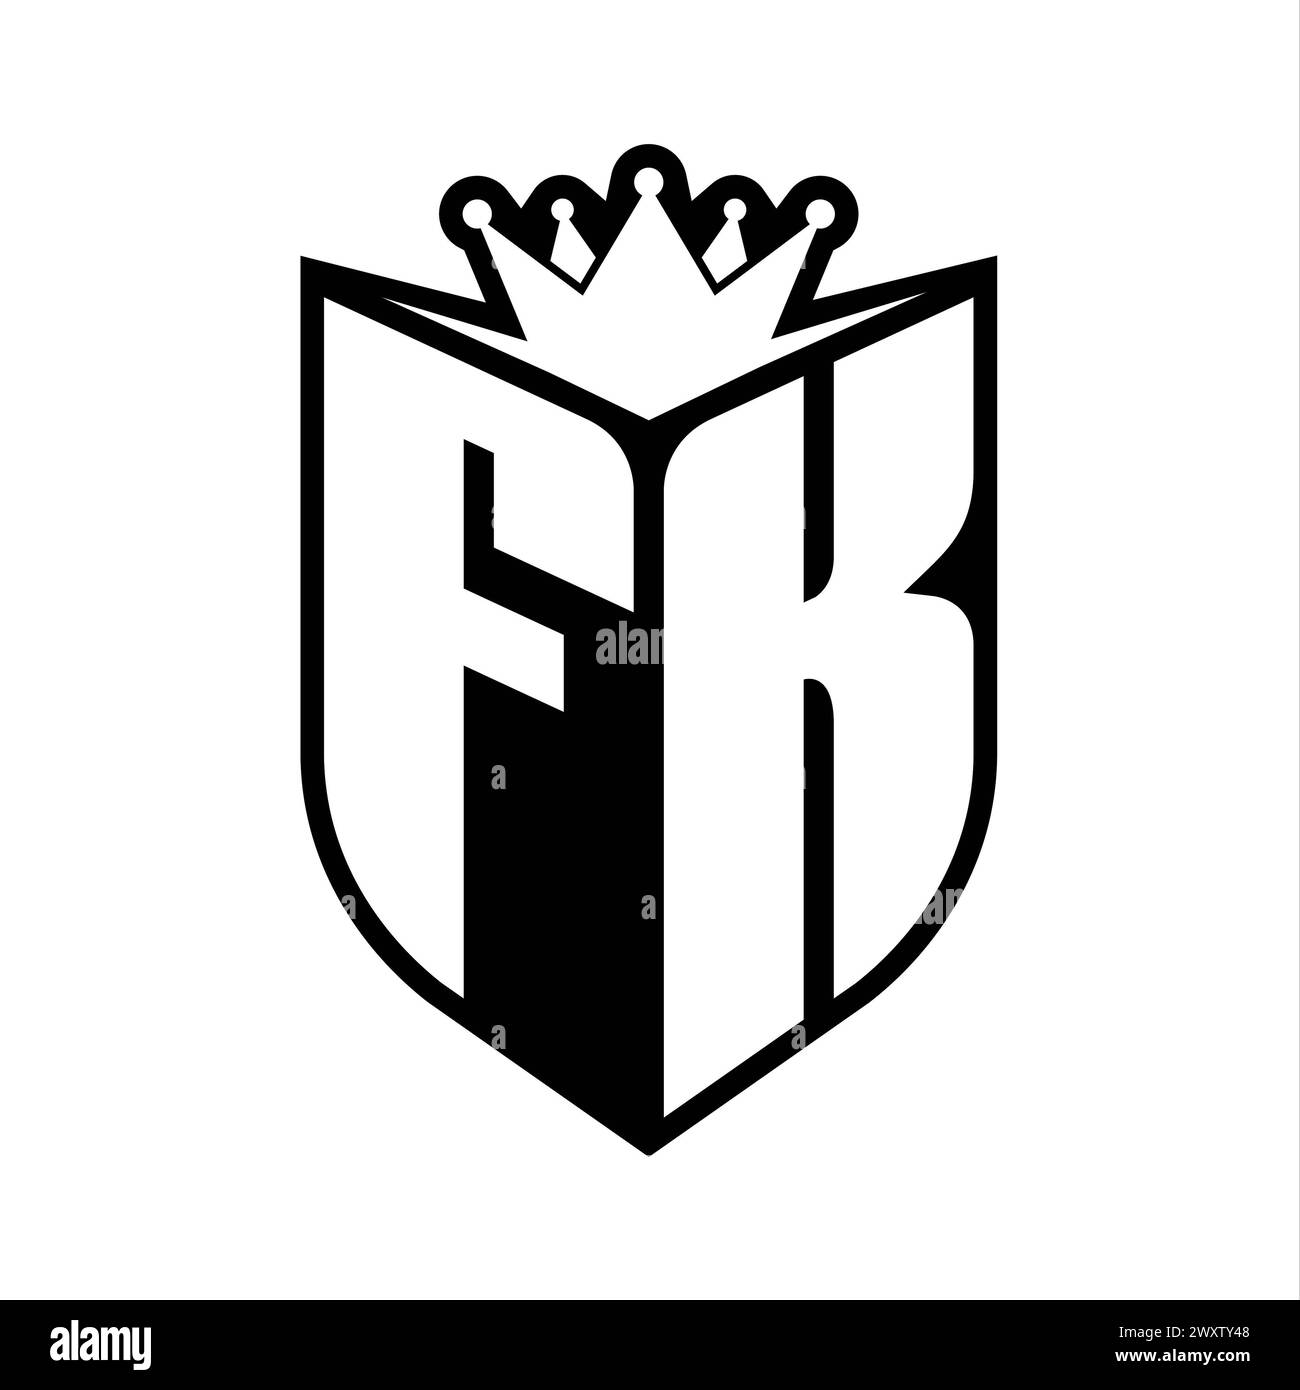 FK Letter bold monogram with shield shape and sharp crown inside shield black and white color design template Stock Photo